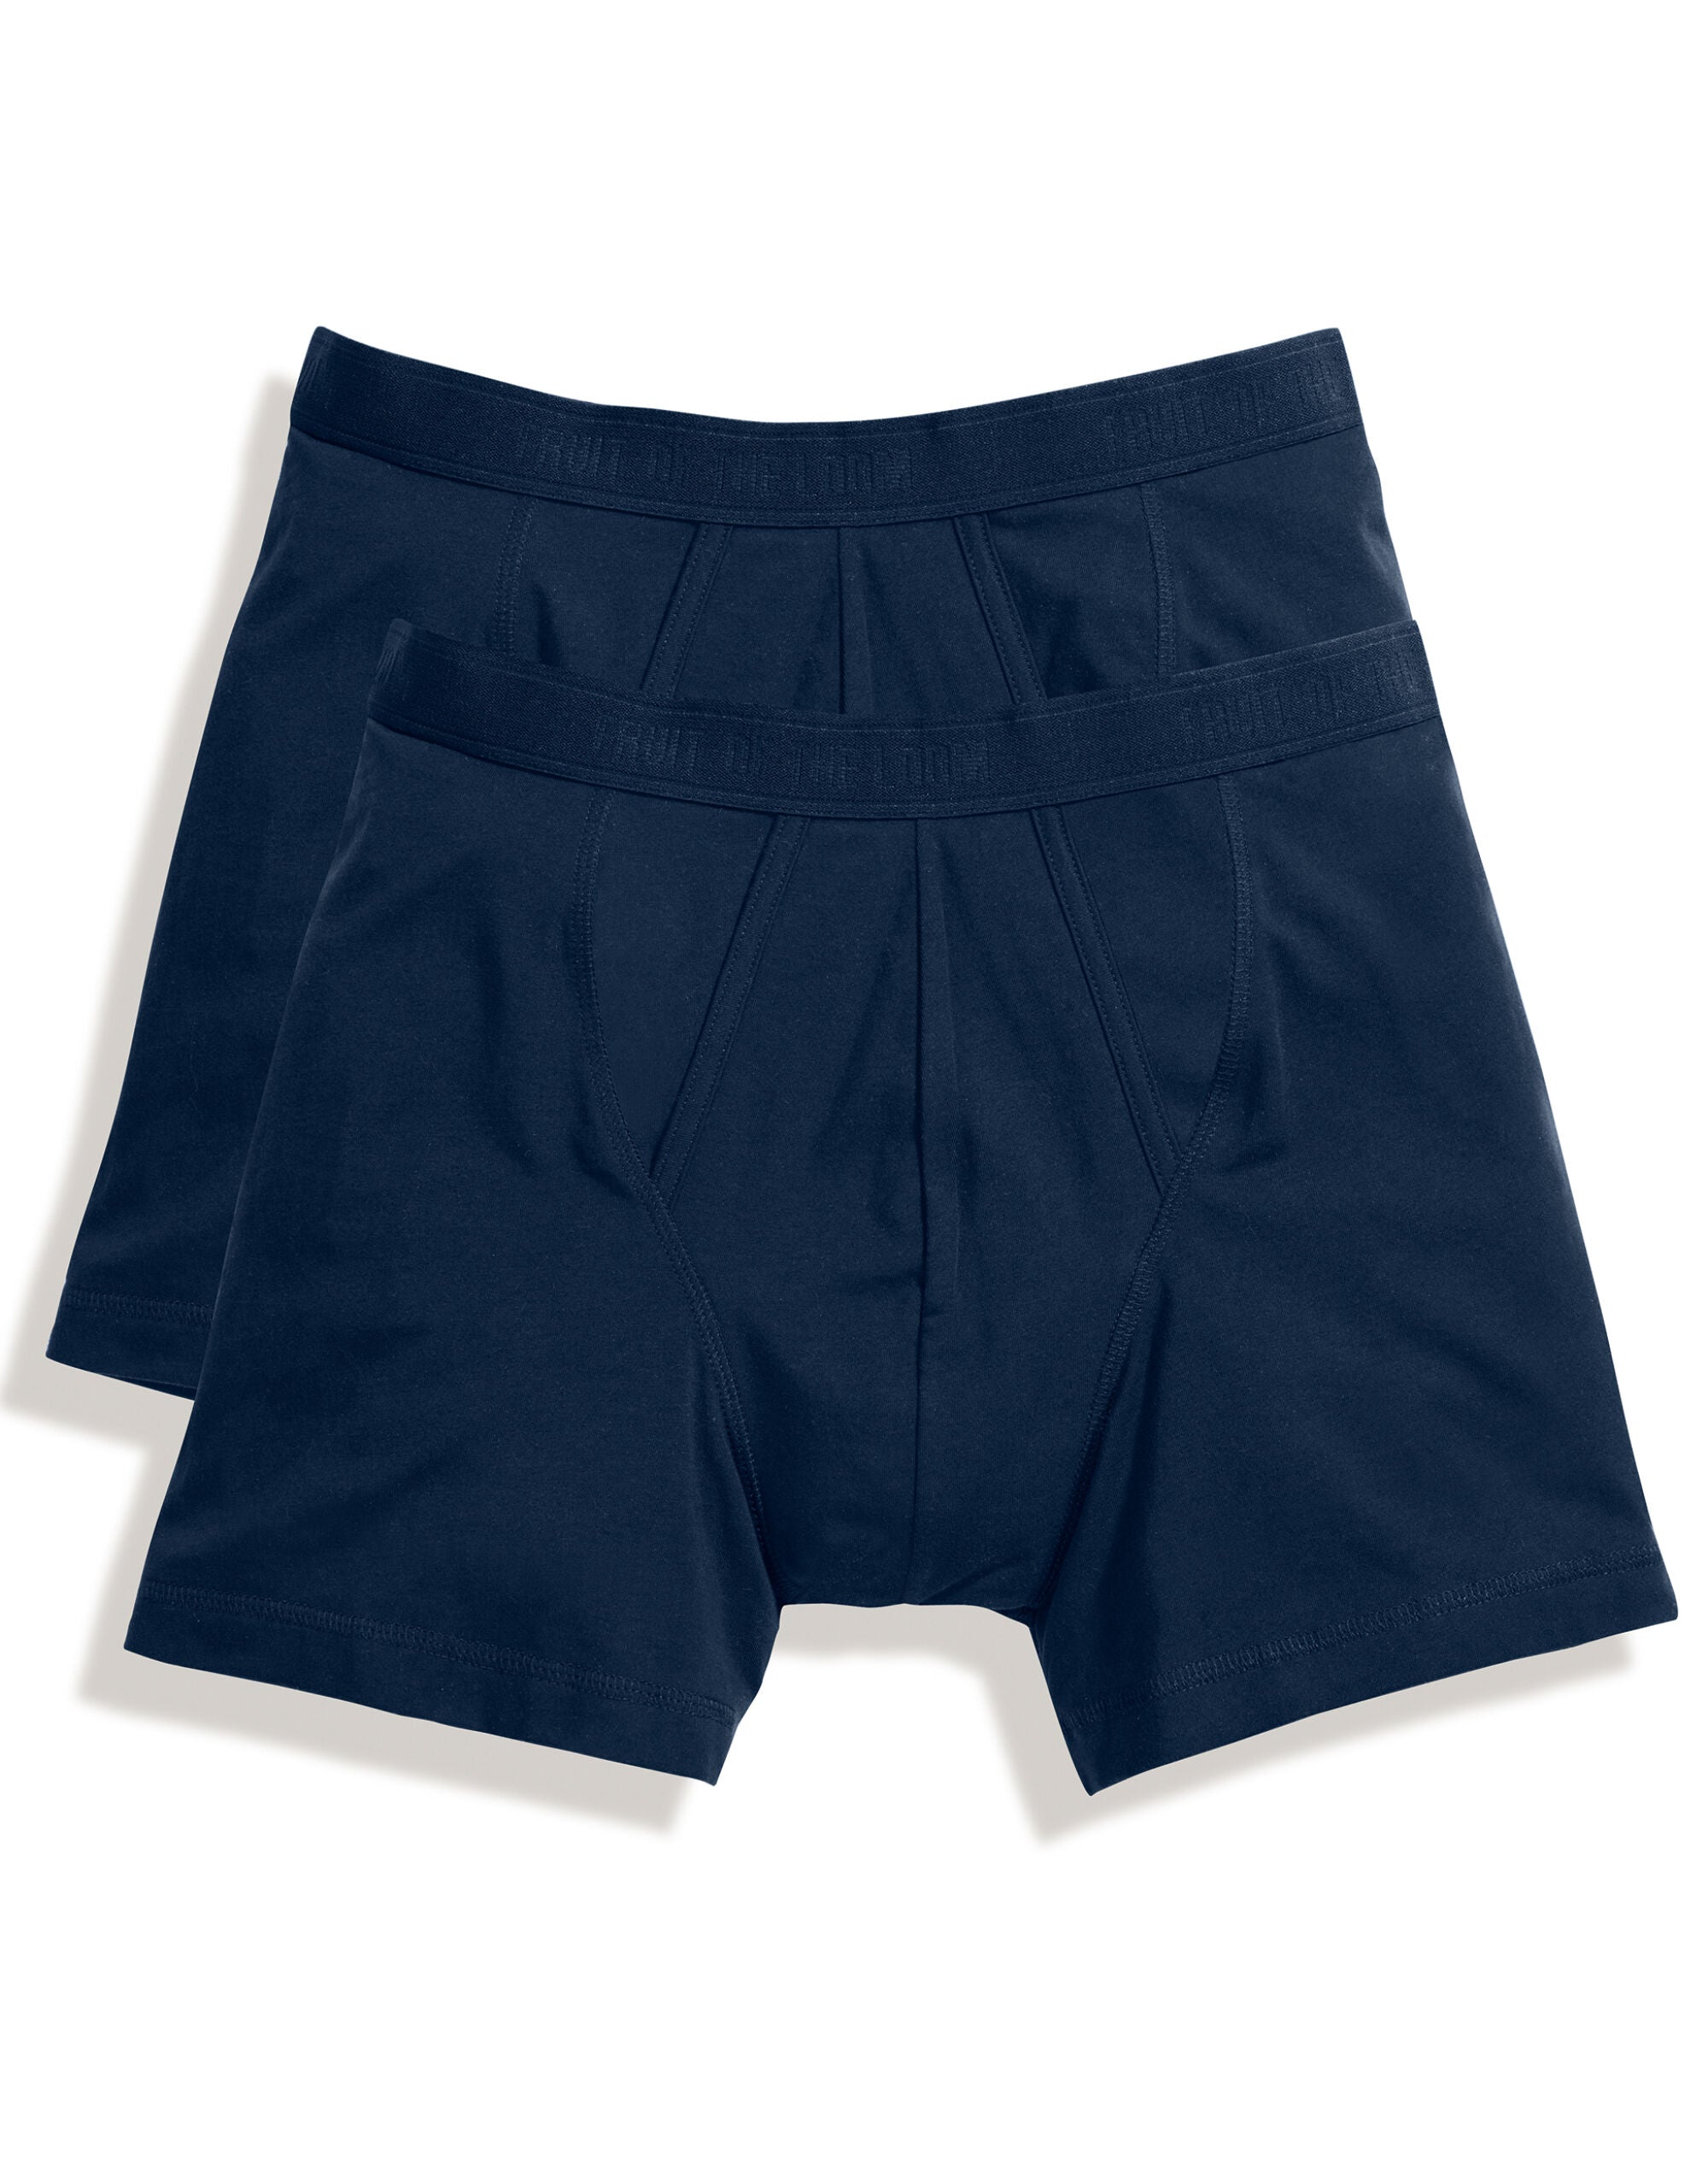 Fruit Of The Loom Underwear Men's Classic Boxer (2 Pack) trunk styling with longer leg length (67026)